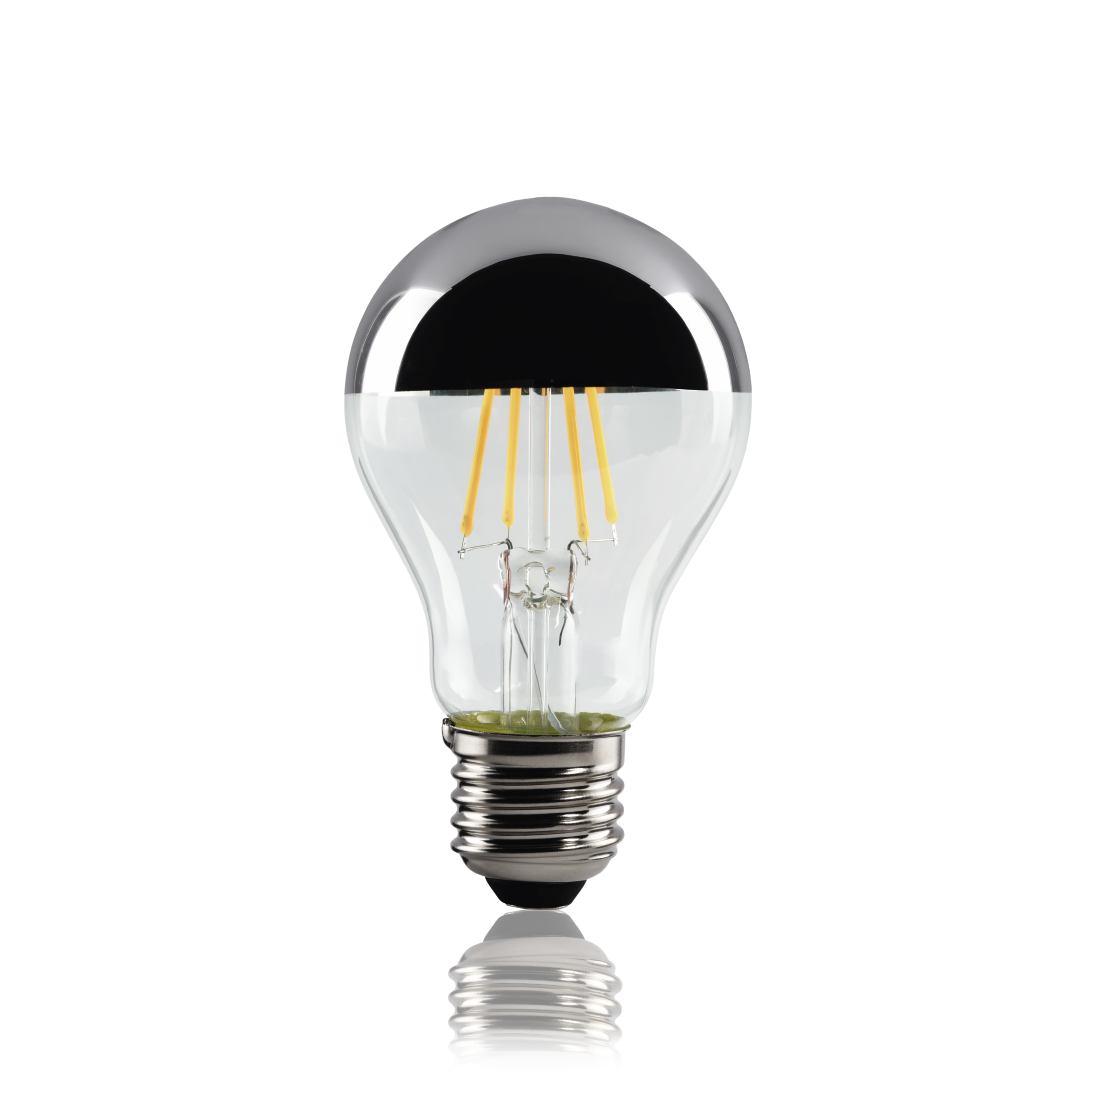 abx2 High-Res Image 2 - Xavax, LED Filament, E27, 400 lm replaces 35W, incandescent bulb, warm white